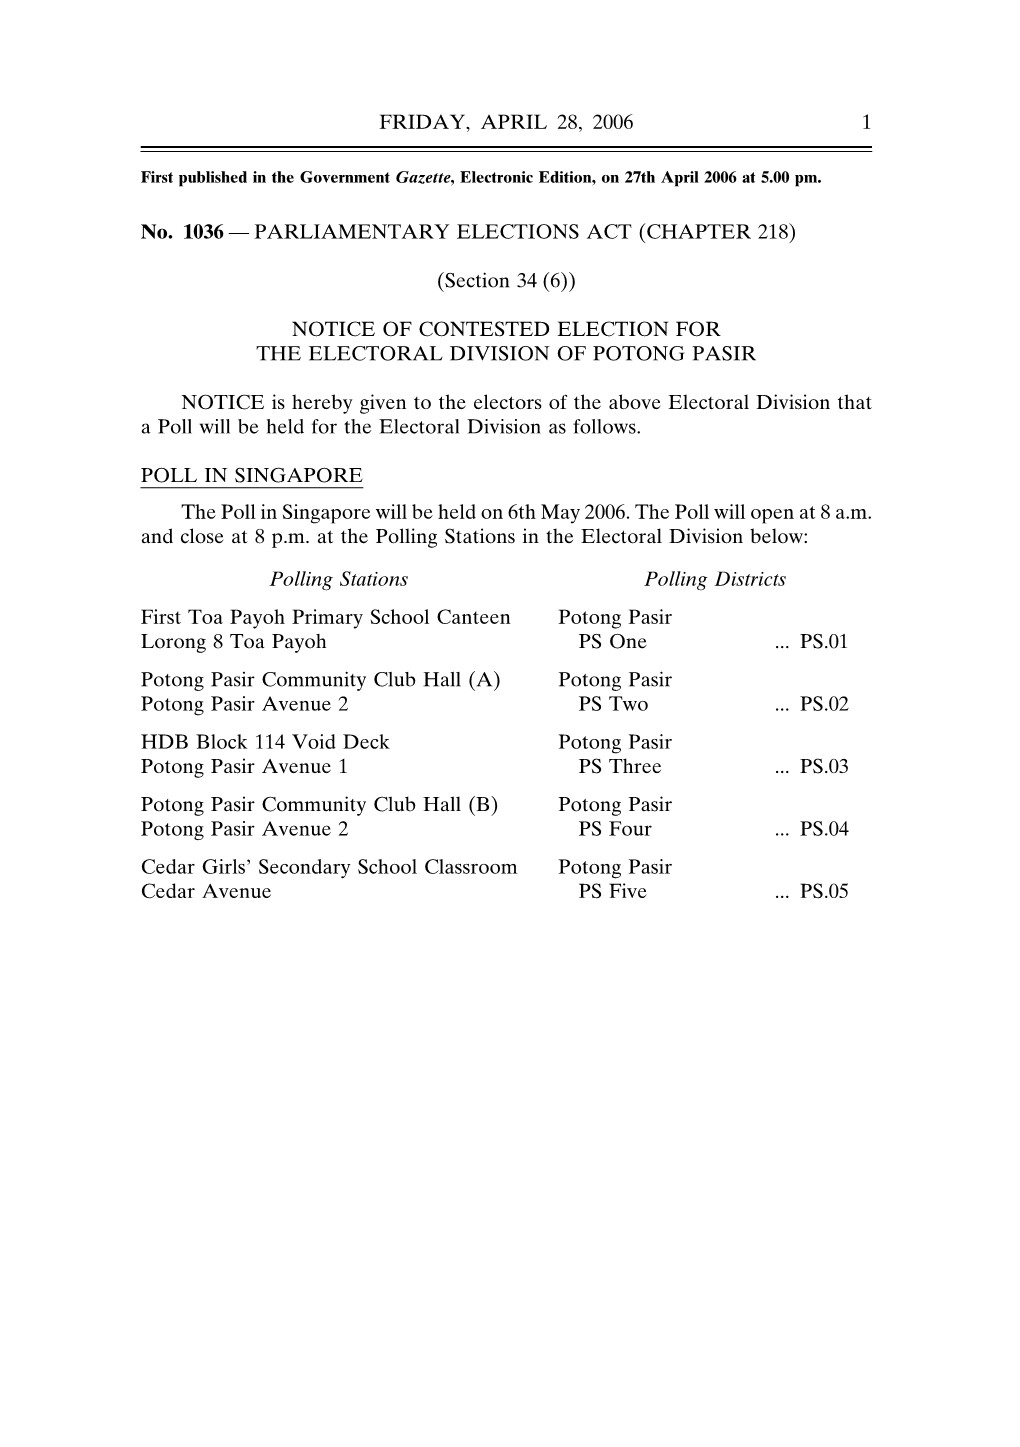 Notice of Contested Election for the Electoral Division of Potong Pasir